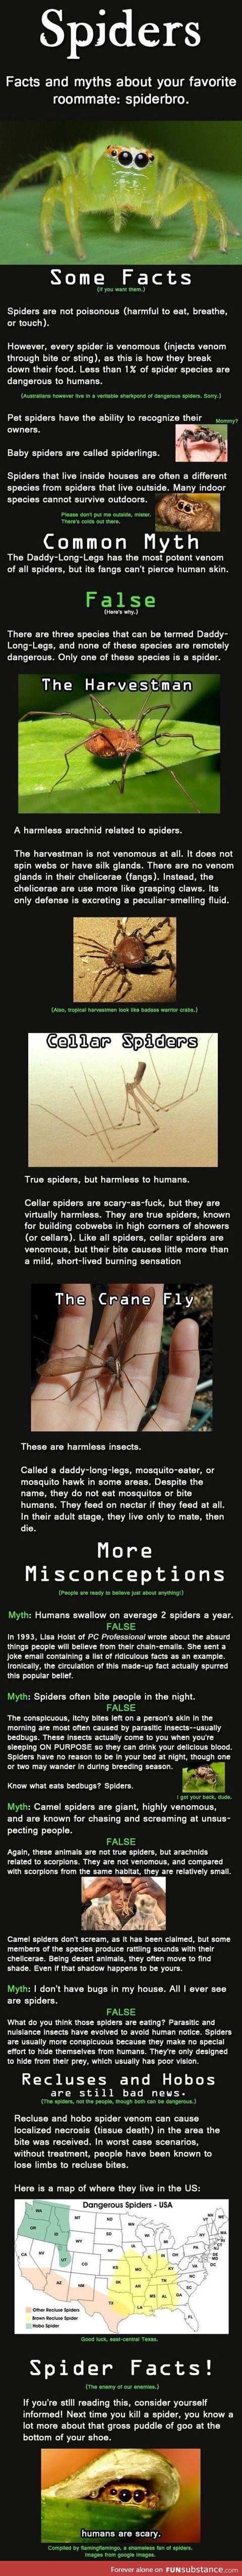 All The Spider Facts You Need To Know